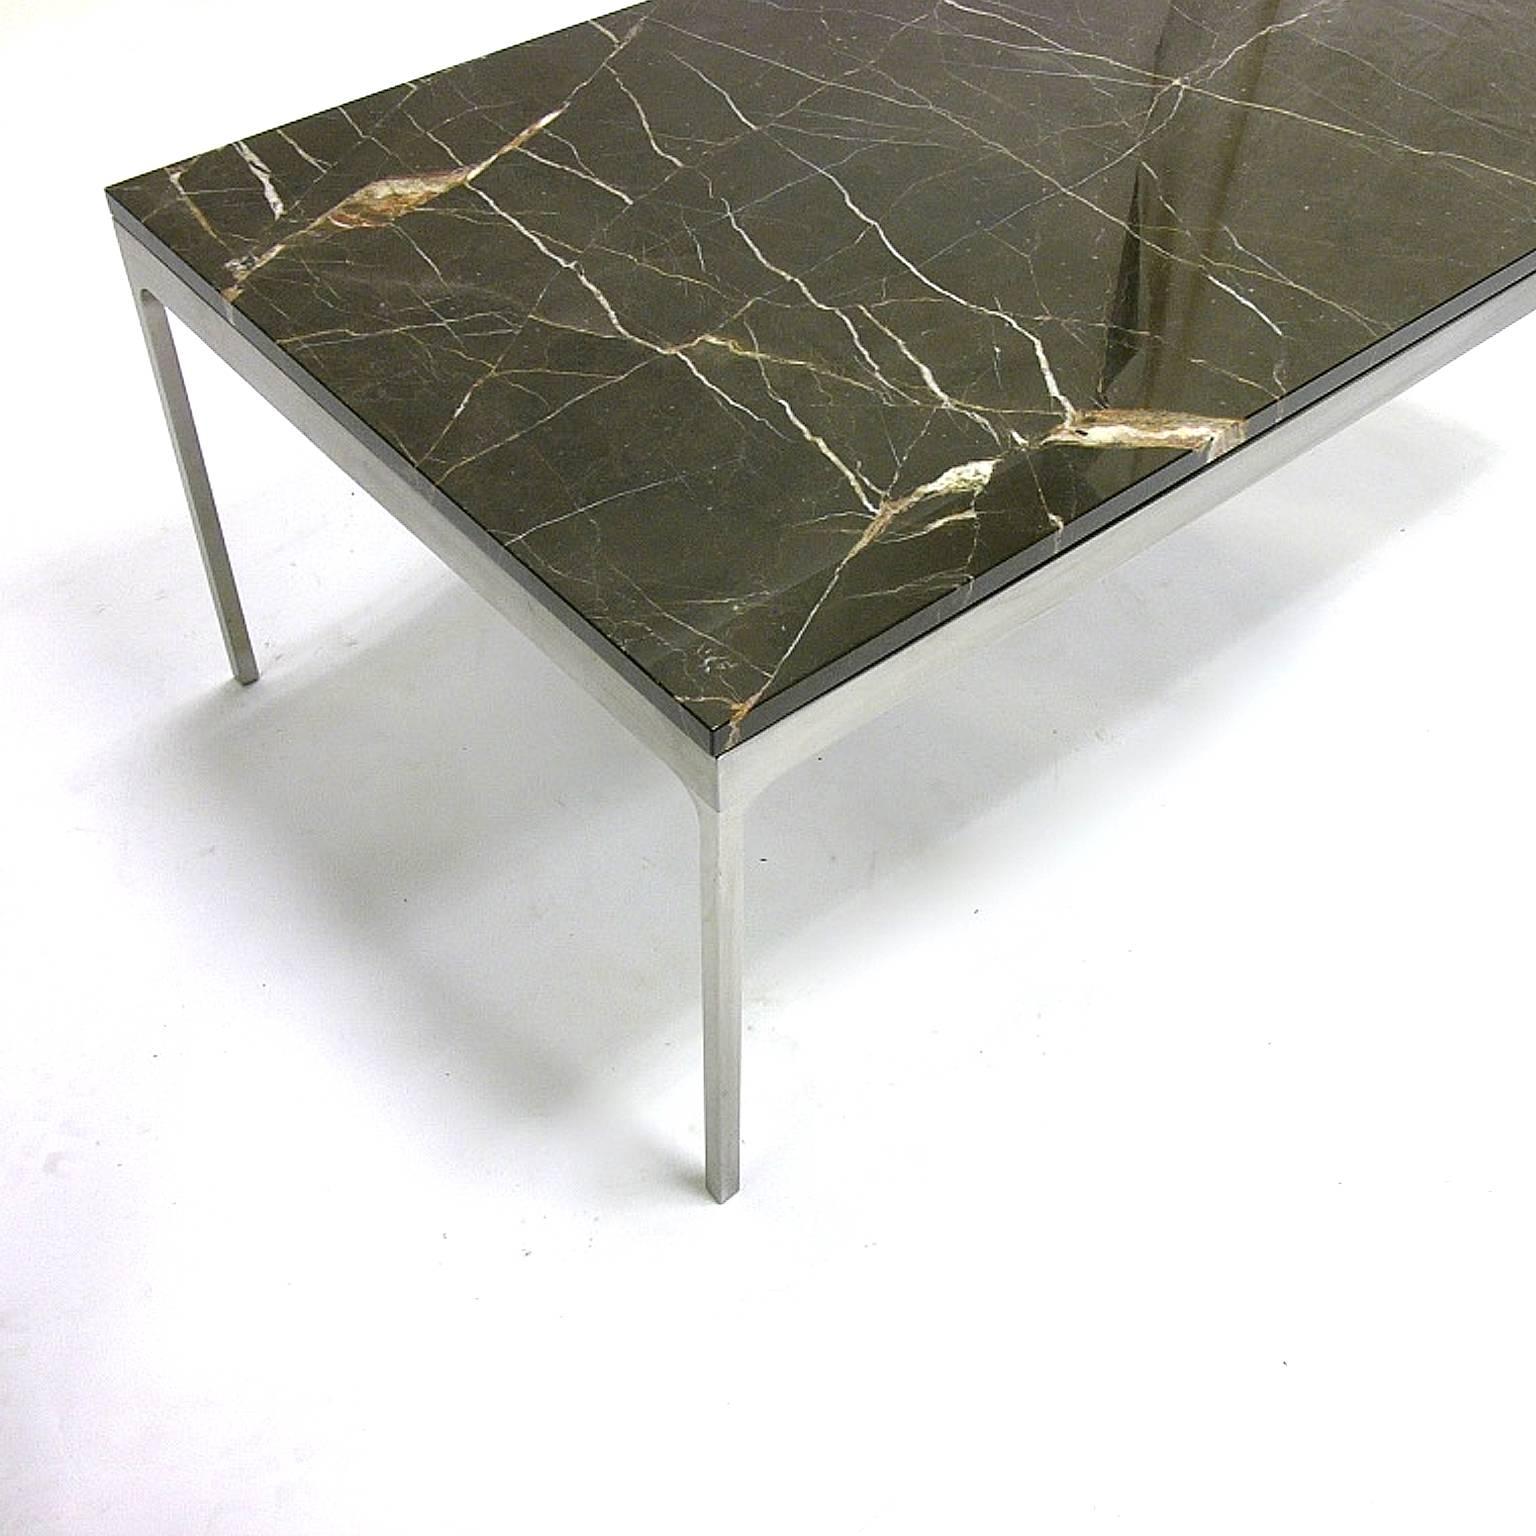 American Nicos Zographos Steel and Black Marble Nero Marquina Coffee or Cocktail Table